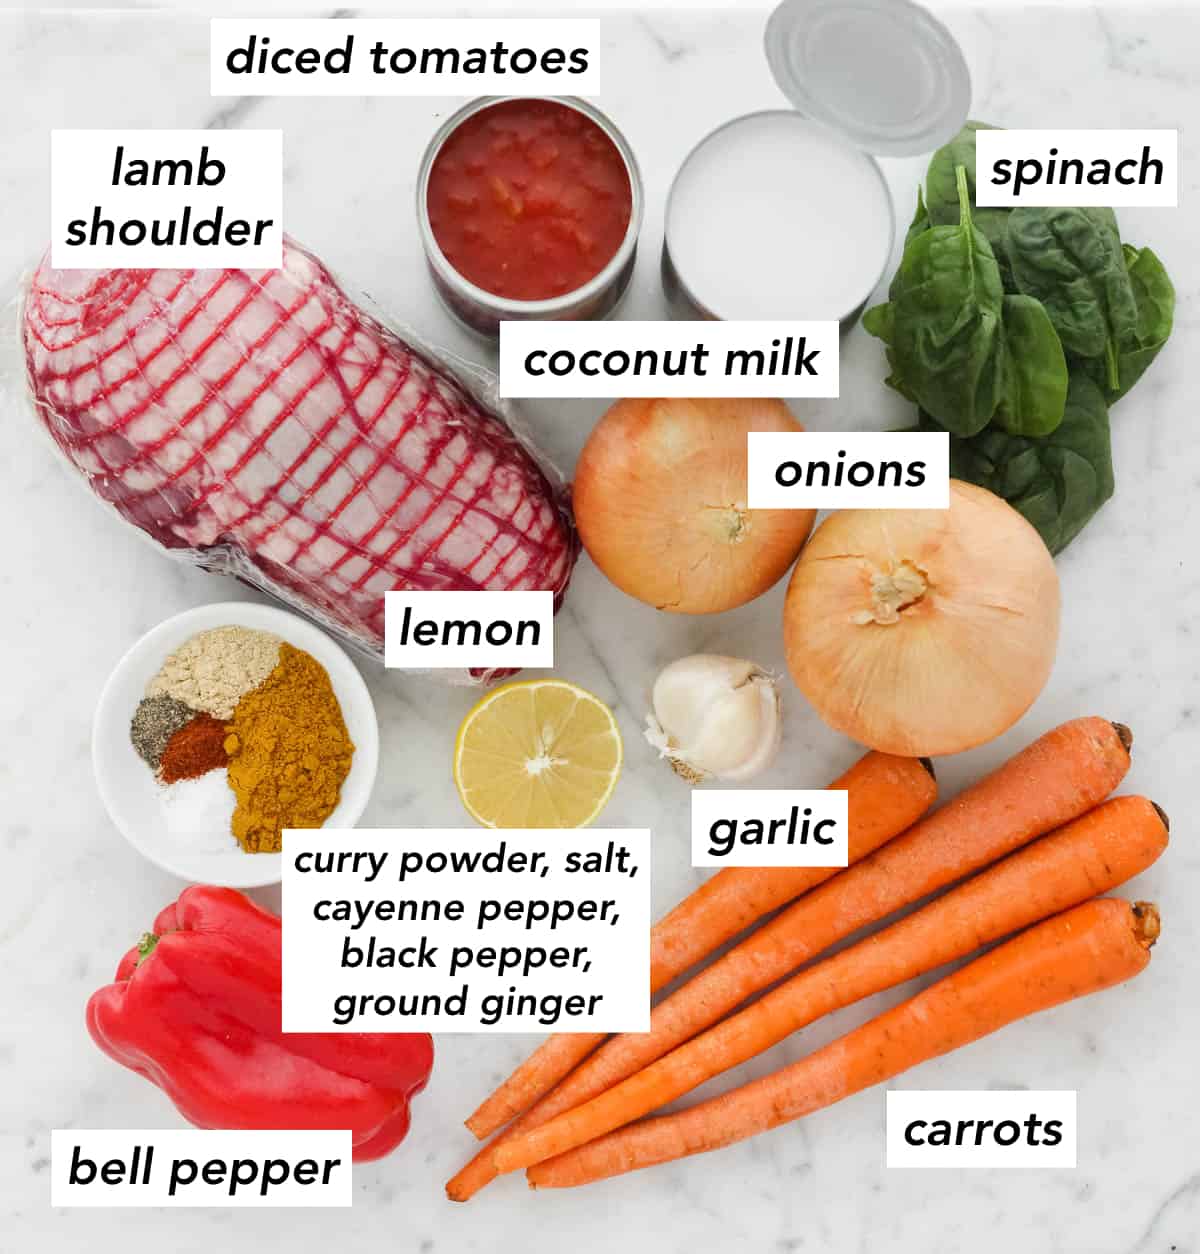 red bell pepper, carrots, cut lemon, bowl of spices, garlic, two onions, lamb shoulder, can of diced tomatoes, can of coconut milk, fresh spinach.